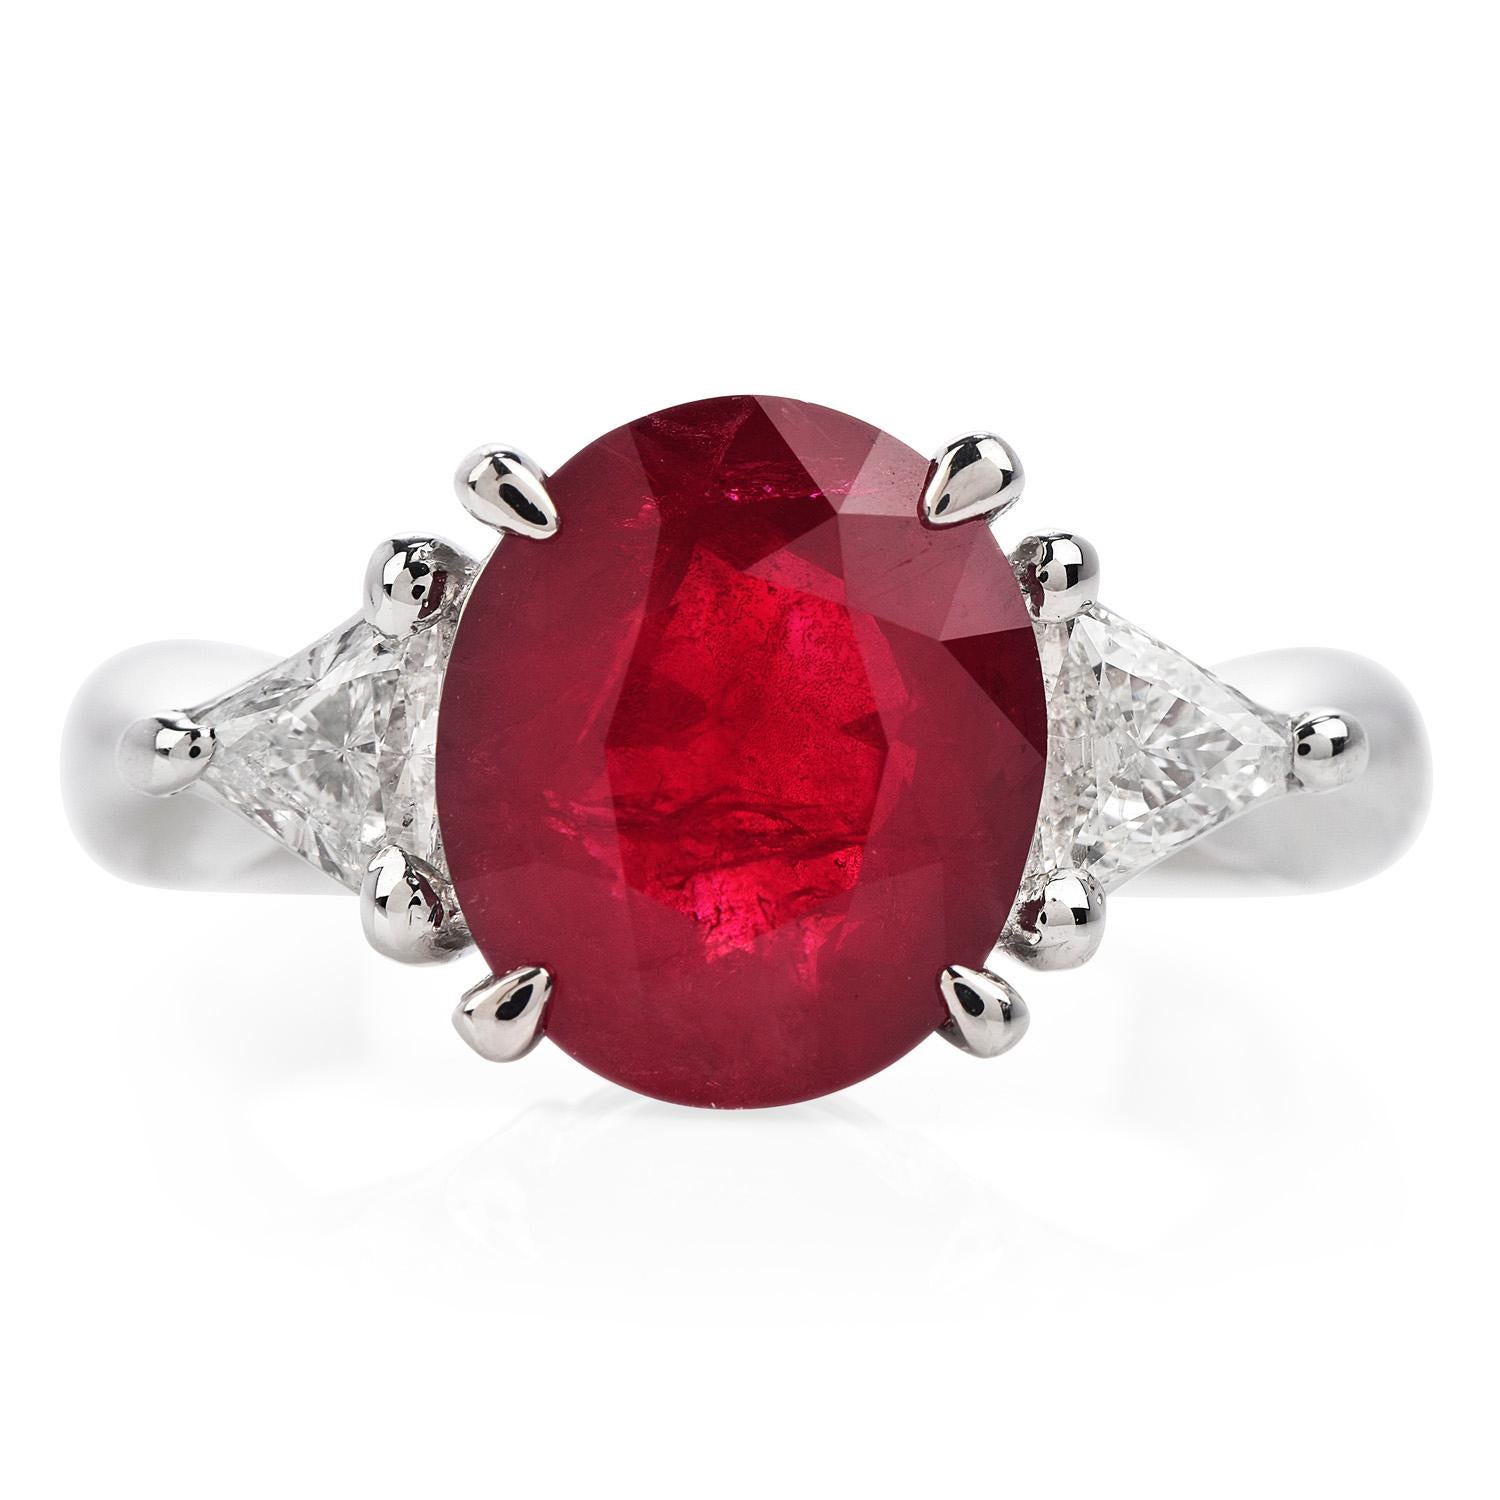 This exquisite GIA Certified Ruby and Diamond Three Stone Ring is the perfect gift for that special occasion and July’s birthstone

The exquisite center stone, carefully bedded in a solid platinum setting. 

Oval Brilliant-Cut natural corundum Ruby